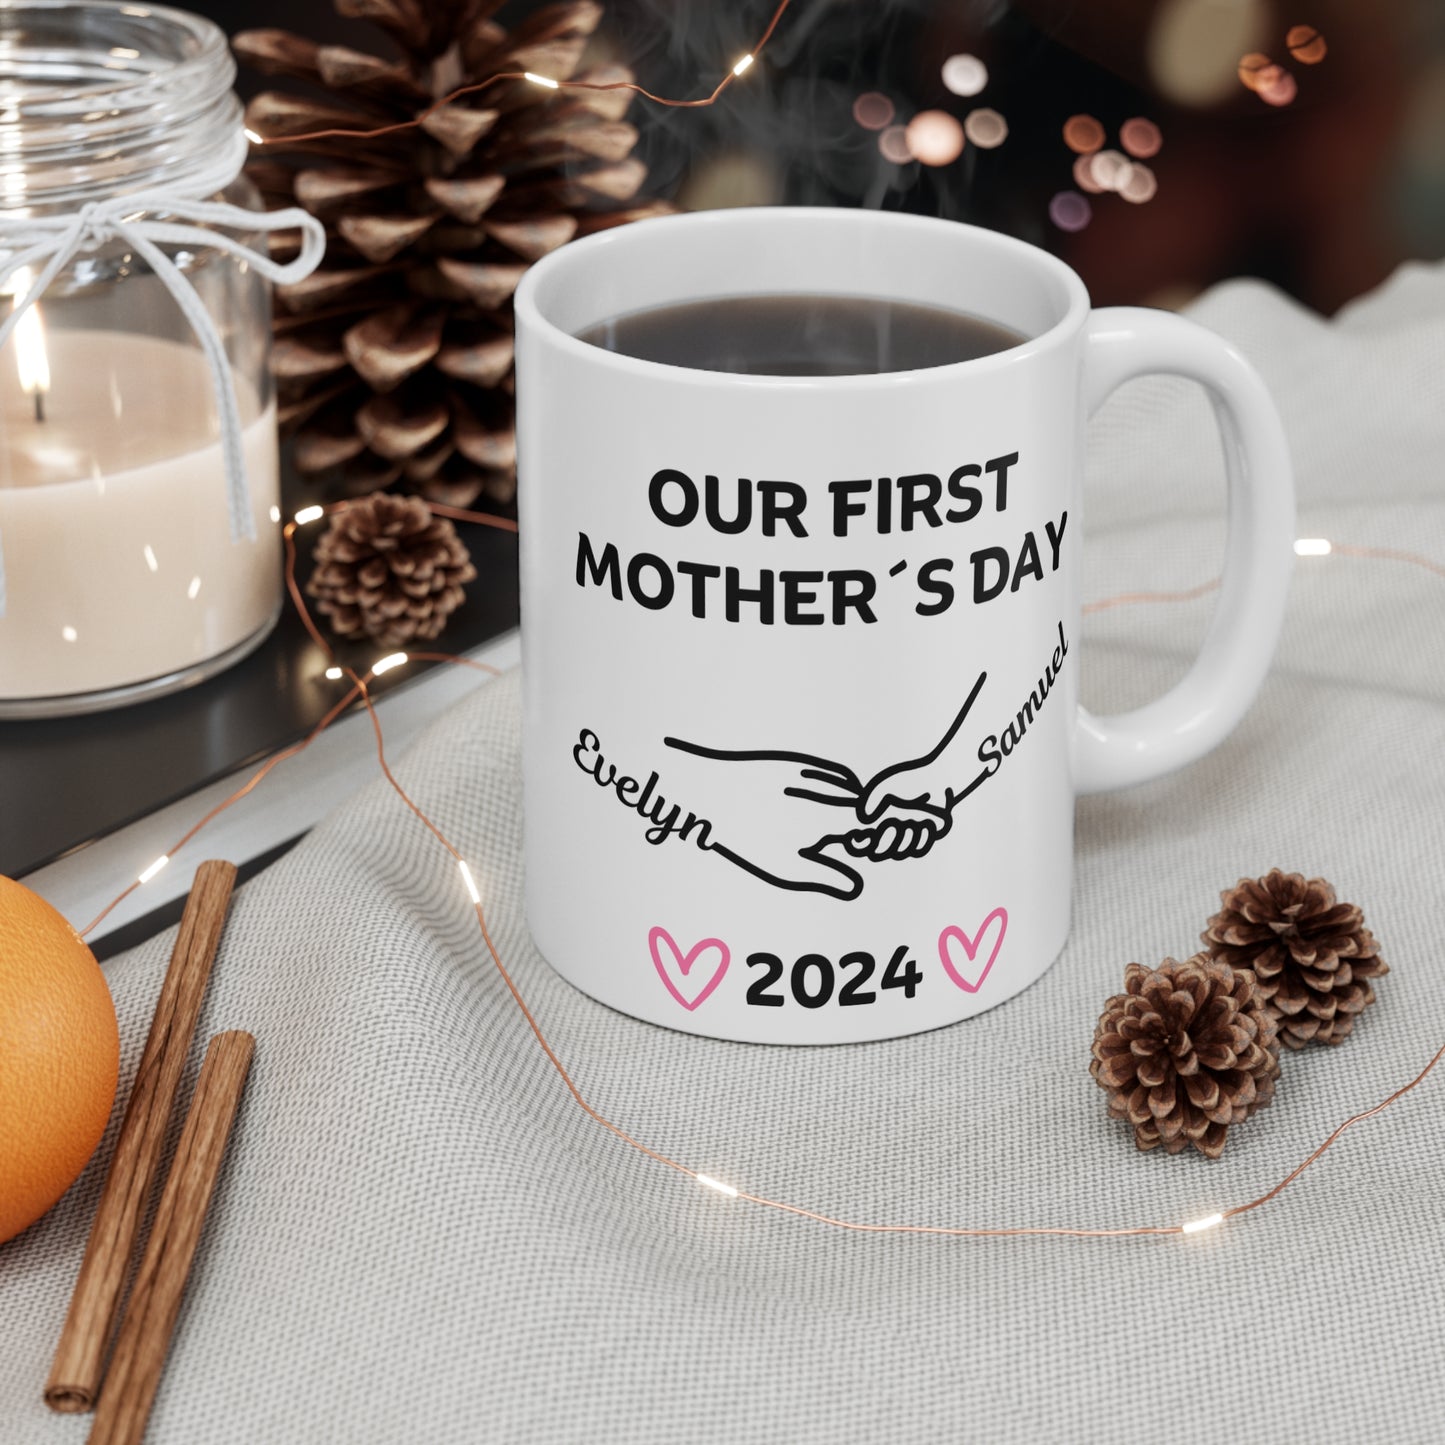 Mug with custom design 11oz, gifts for mom, personalized Cup for mom, mama gifts (our first mother´s day)